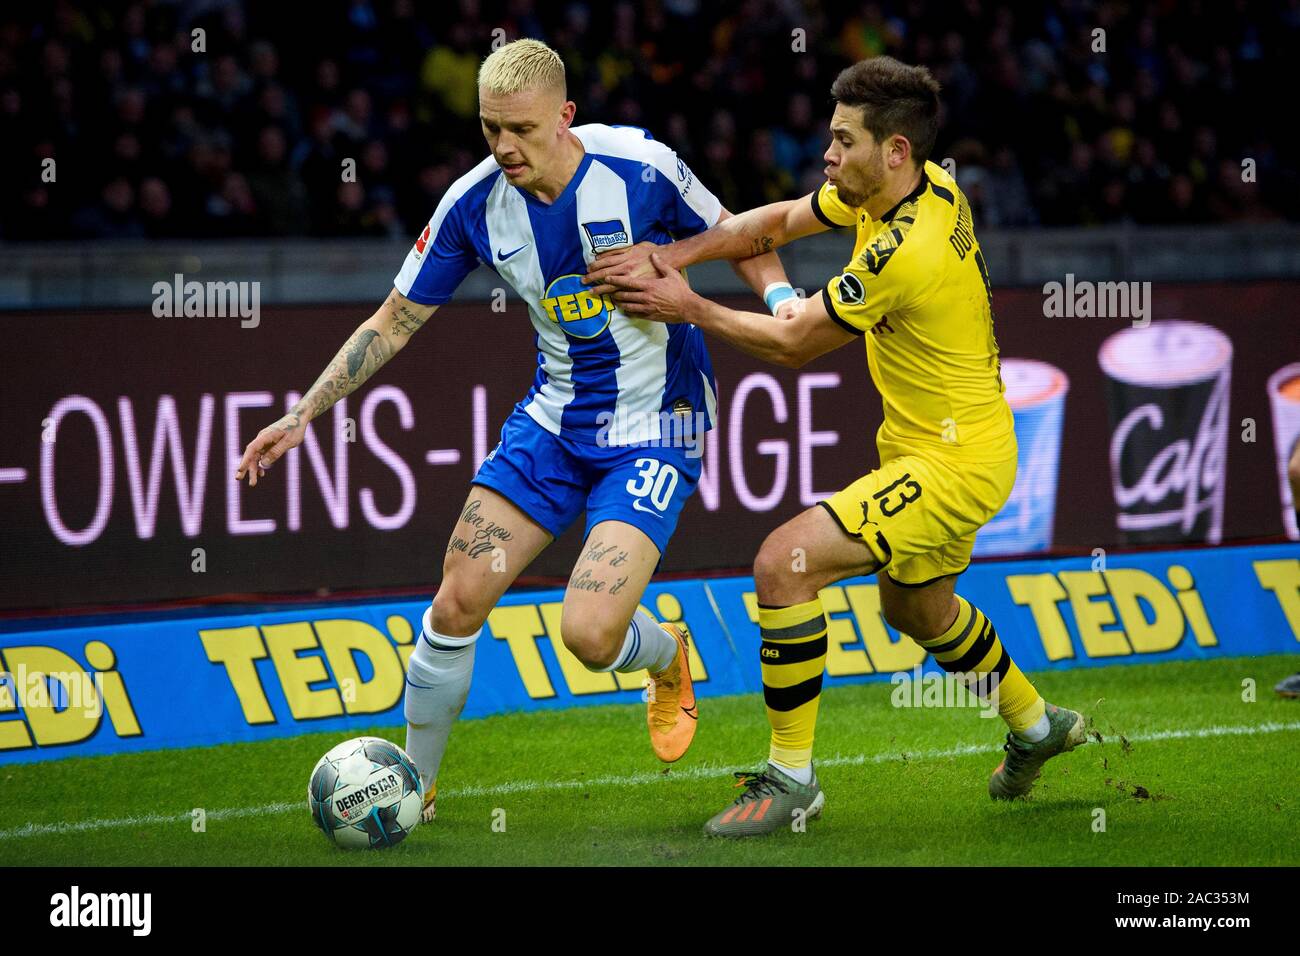 Berlin, Germany. 30th Nov, 2019. Soccer: Bundesliga, Hertha BSC - Borussia Dortmund, 13th matchday, Olympiastadion Berlin. Berlin's Marius Wolf and Dortmund's Raphael Guerreiro (r) in a duel. Credit: Gregor Fischer/dpa - IMPORTANT NOTE: In accordance with the requirements of the DFL Deutsche Fußball Liga or the DFB Deutscher Fußball-Bund, it is prohibited to use or have used photographs taken in the stadium and/or the match in the form of sequence images and/or video-like photo sequences./dpa/Alamy Live News Stock Photo